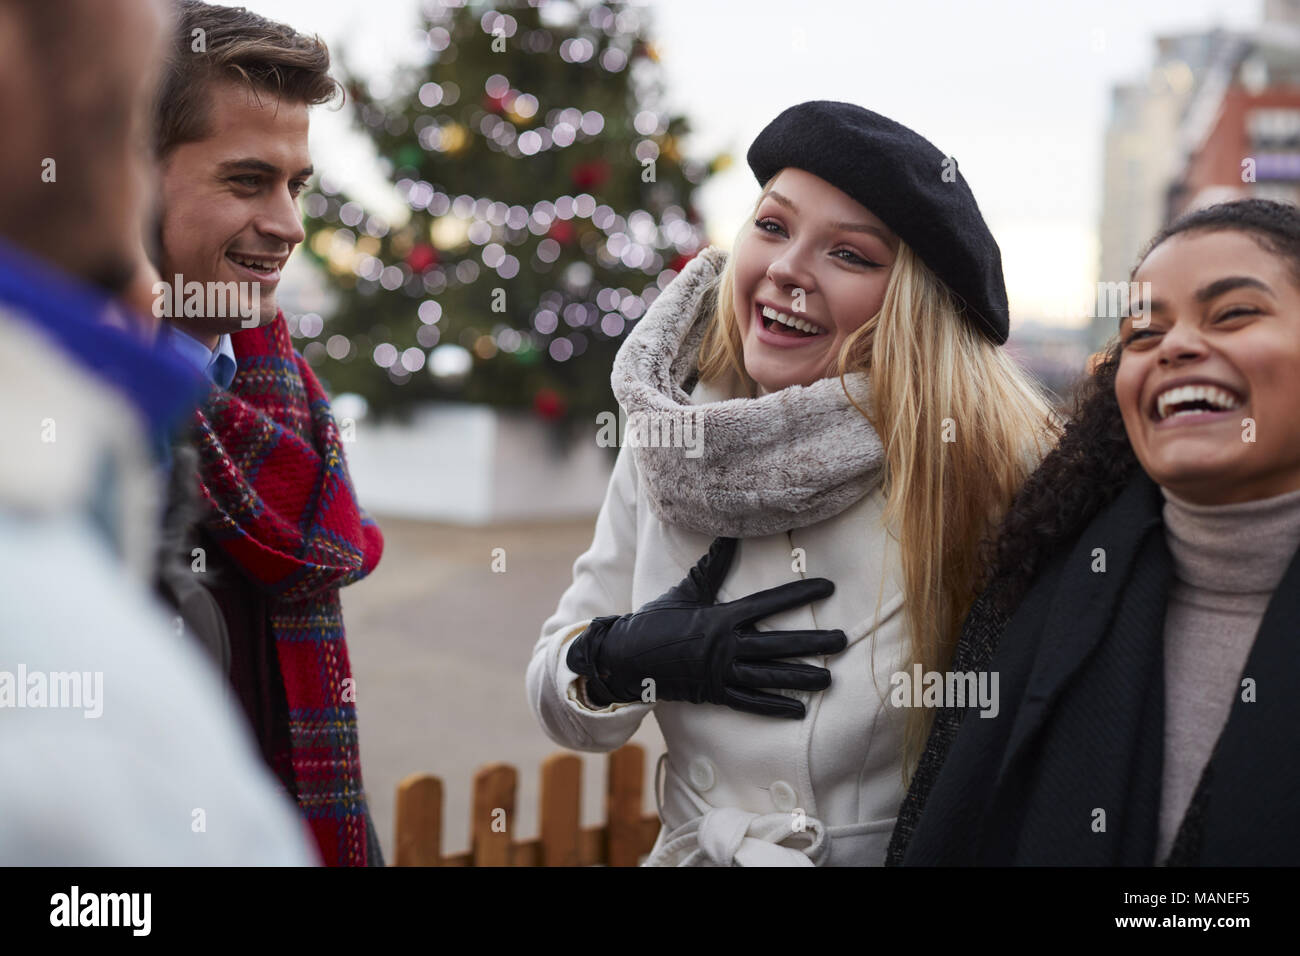 Young Friends On Walk Standing By Christmas Tree Stock Photo